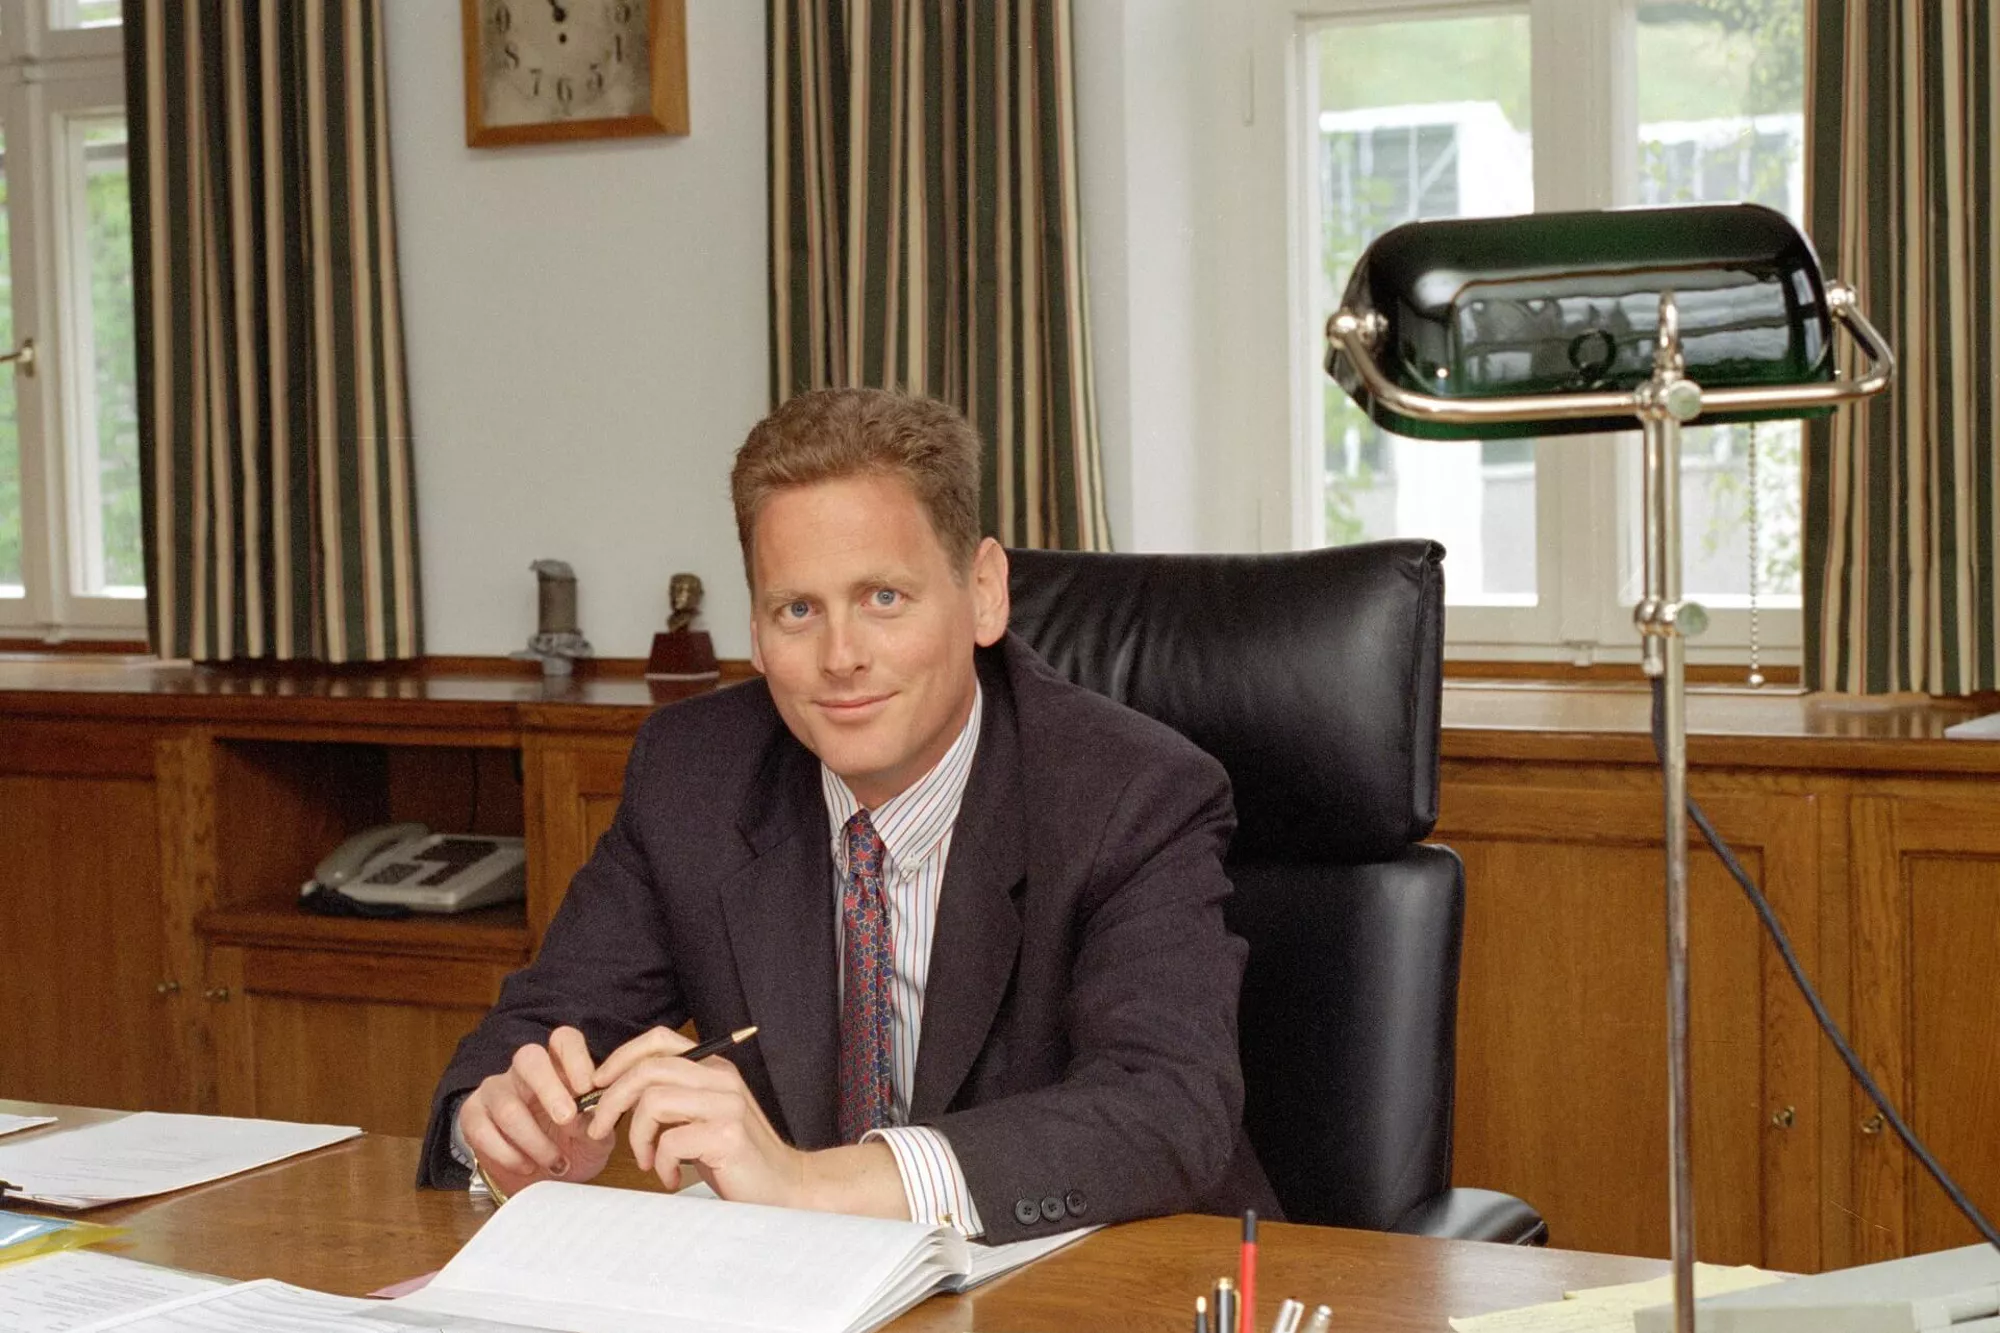 Plansee Managing Director Chairman of the Supervisory Board Michael Schwarzkopf at his desk